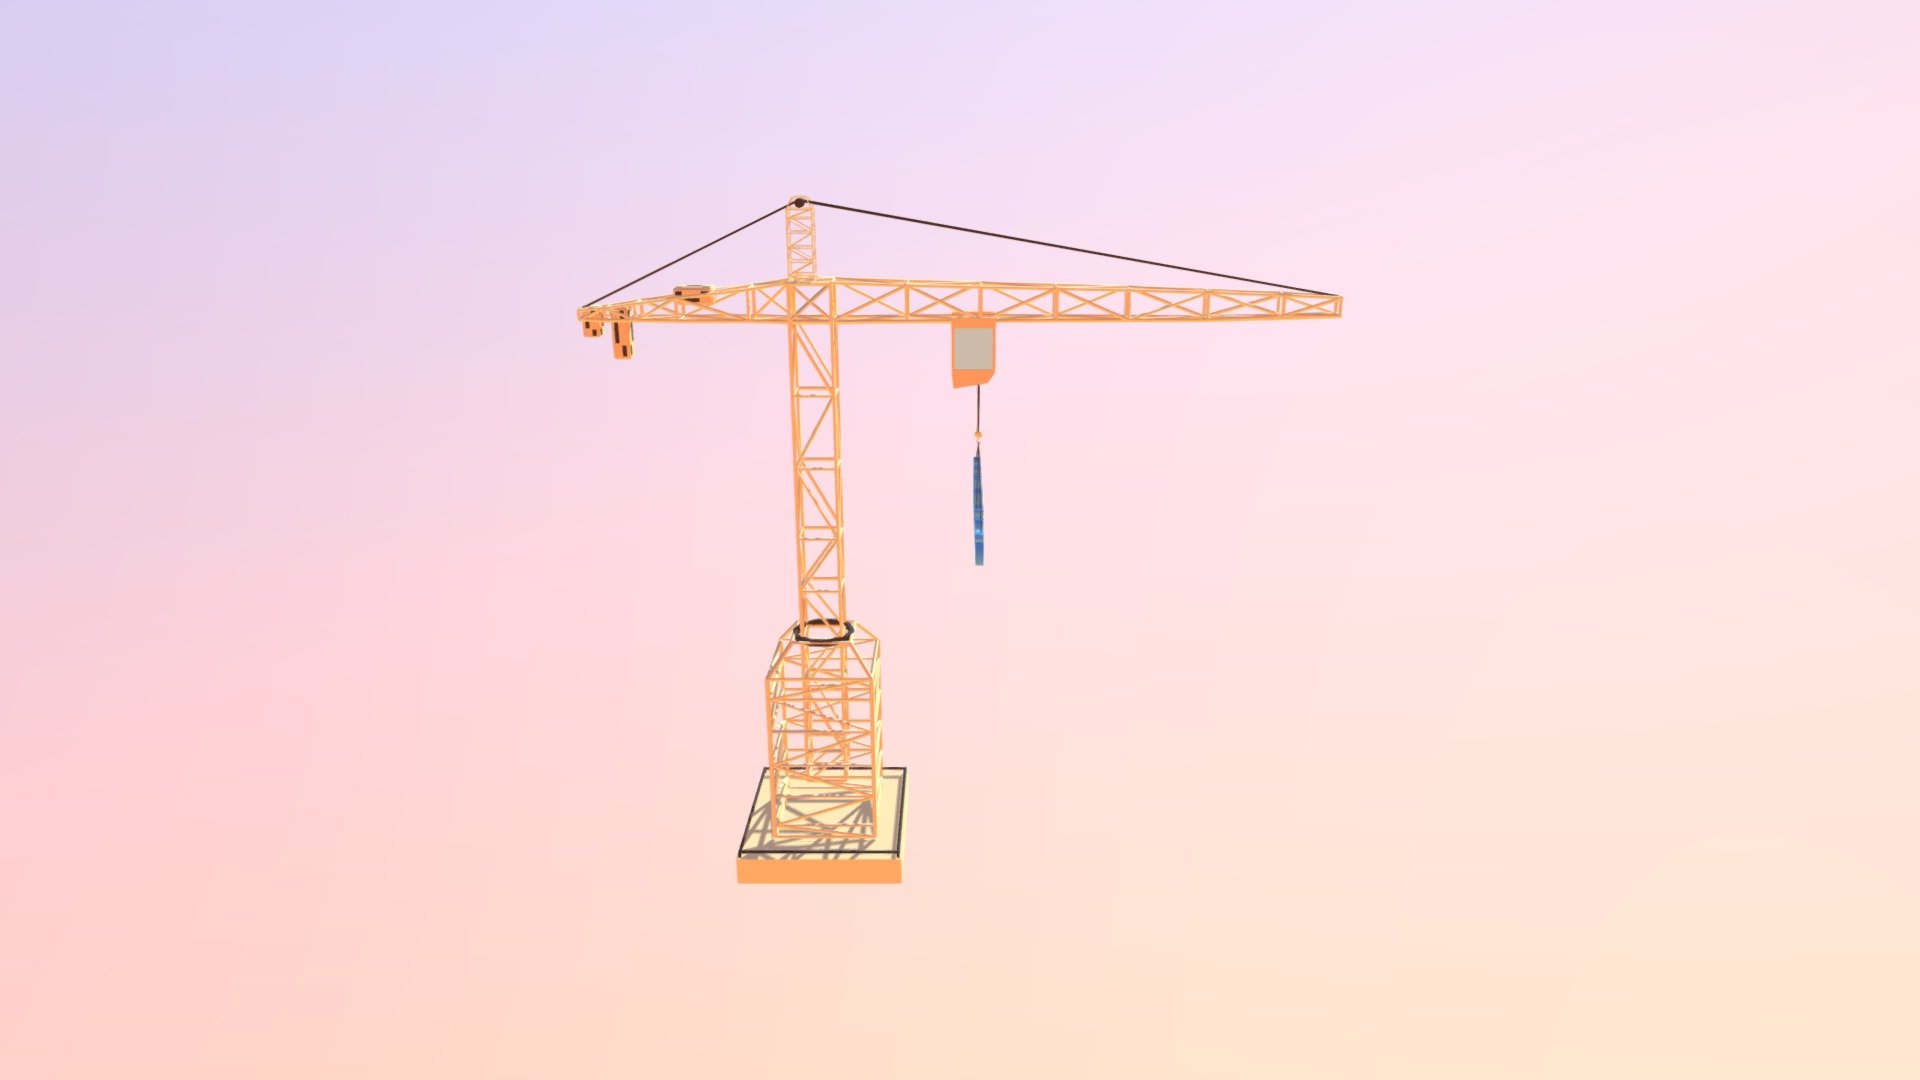 This is my first project and I hope you enjoy it
Thank you :) - Building crane low poly - Download Free 3D model by Mostafa Hamed (@misohamed252) 3d model